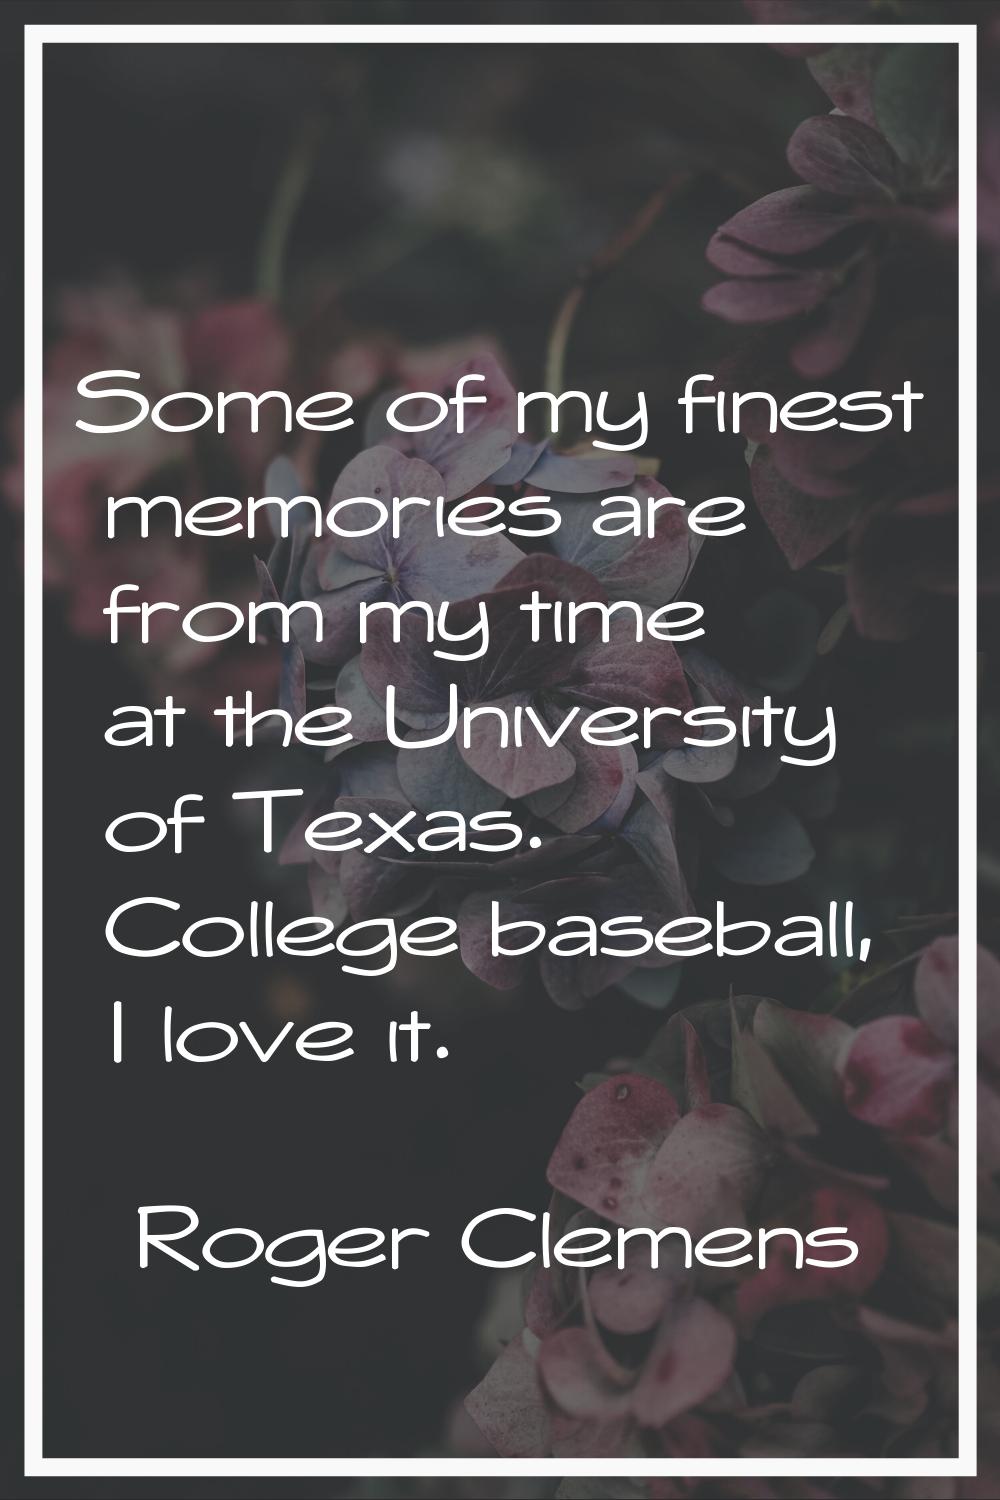 Some of my finest memories are from my time at the University of Texas. College baseball, I love it